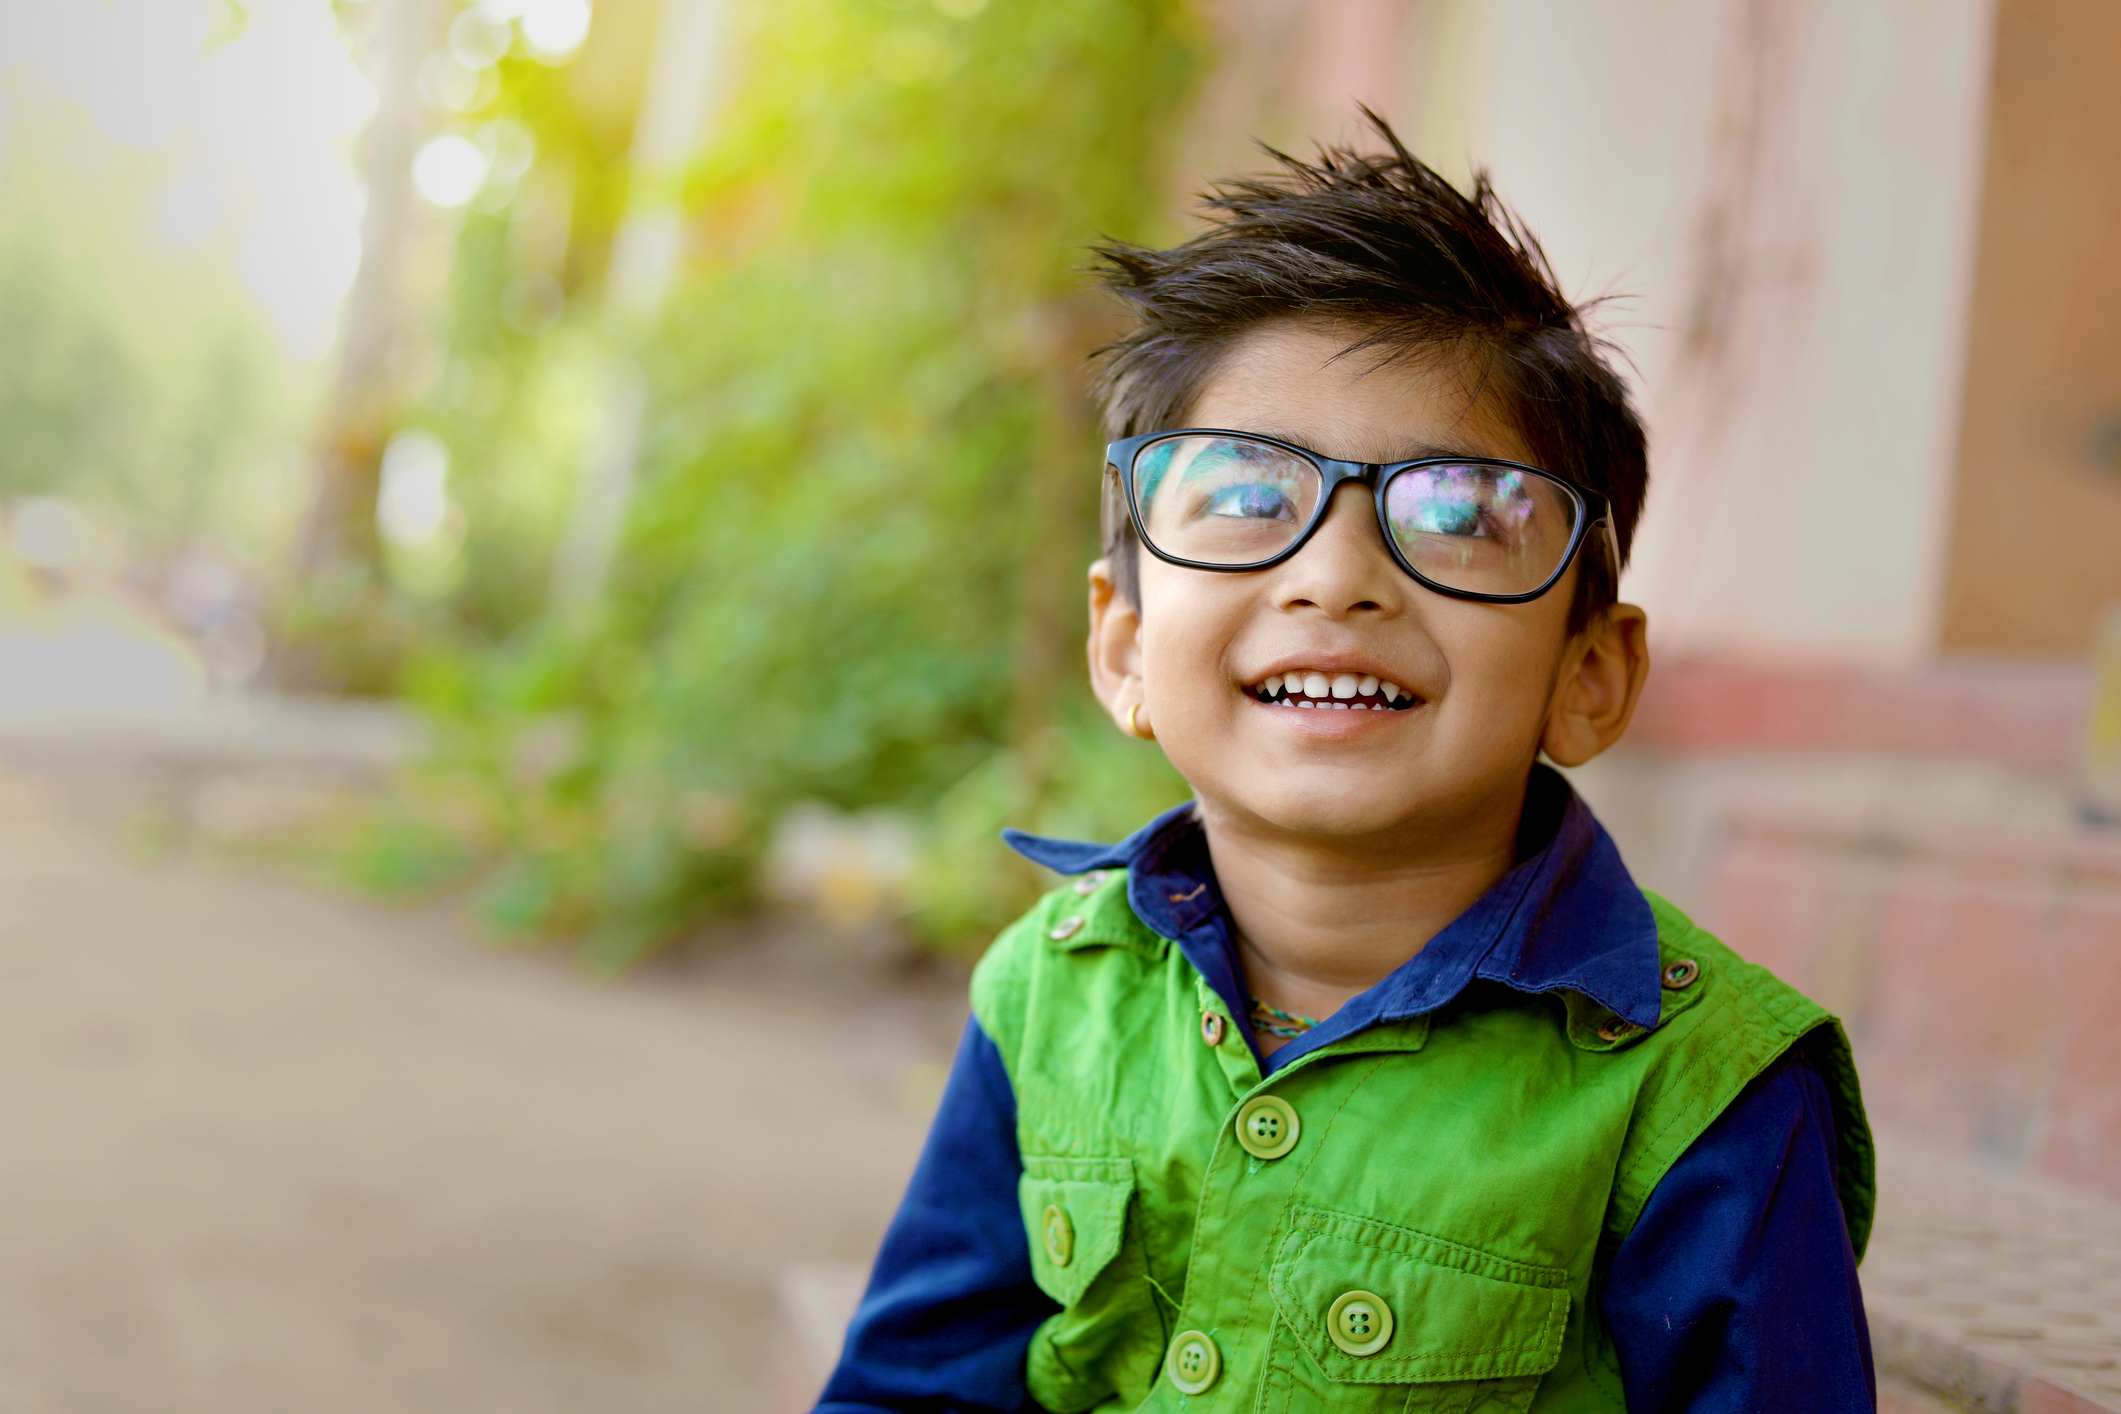 young boy wearing glasses